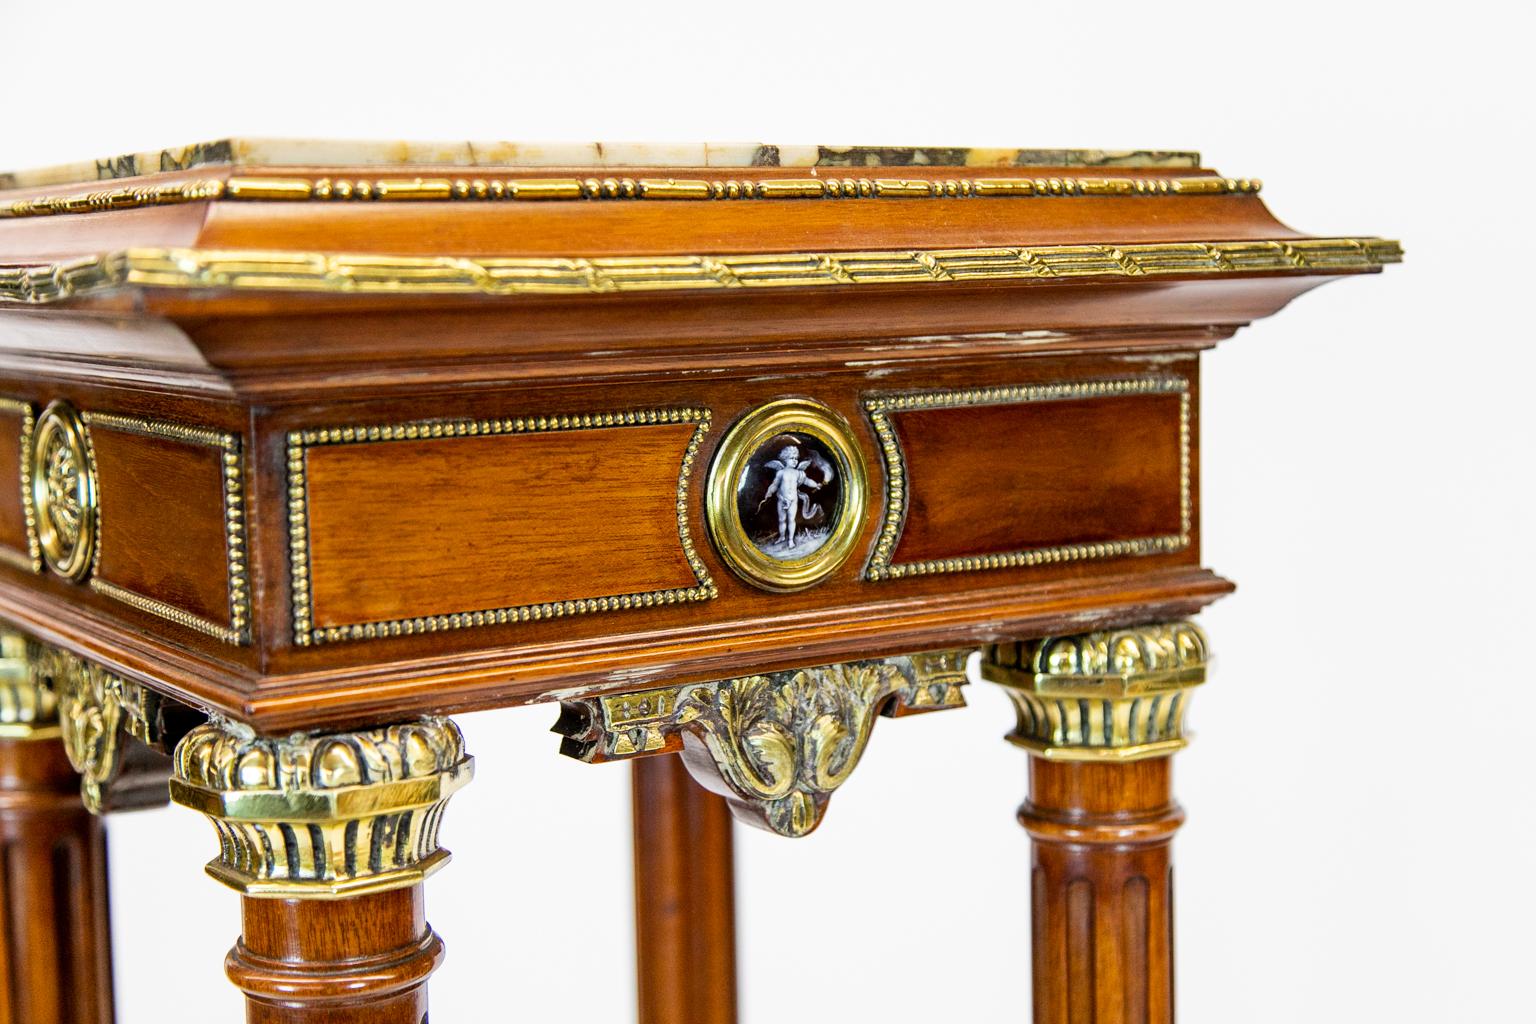 French mahogany marble-top pedestal on bun feet with heavy cast brass moldings and capitals, stop fluted columns and porcelain cartouche panels, one has a figure of a woman, and the opposite is a cupid with a torch.
 